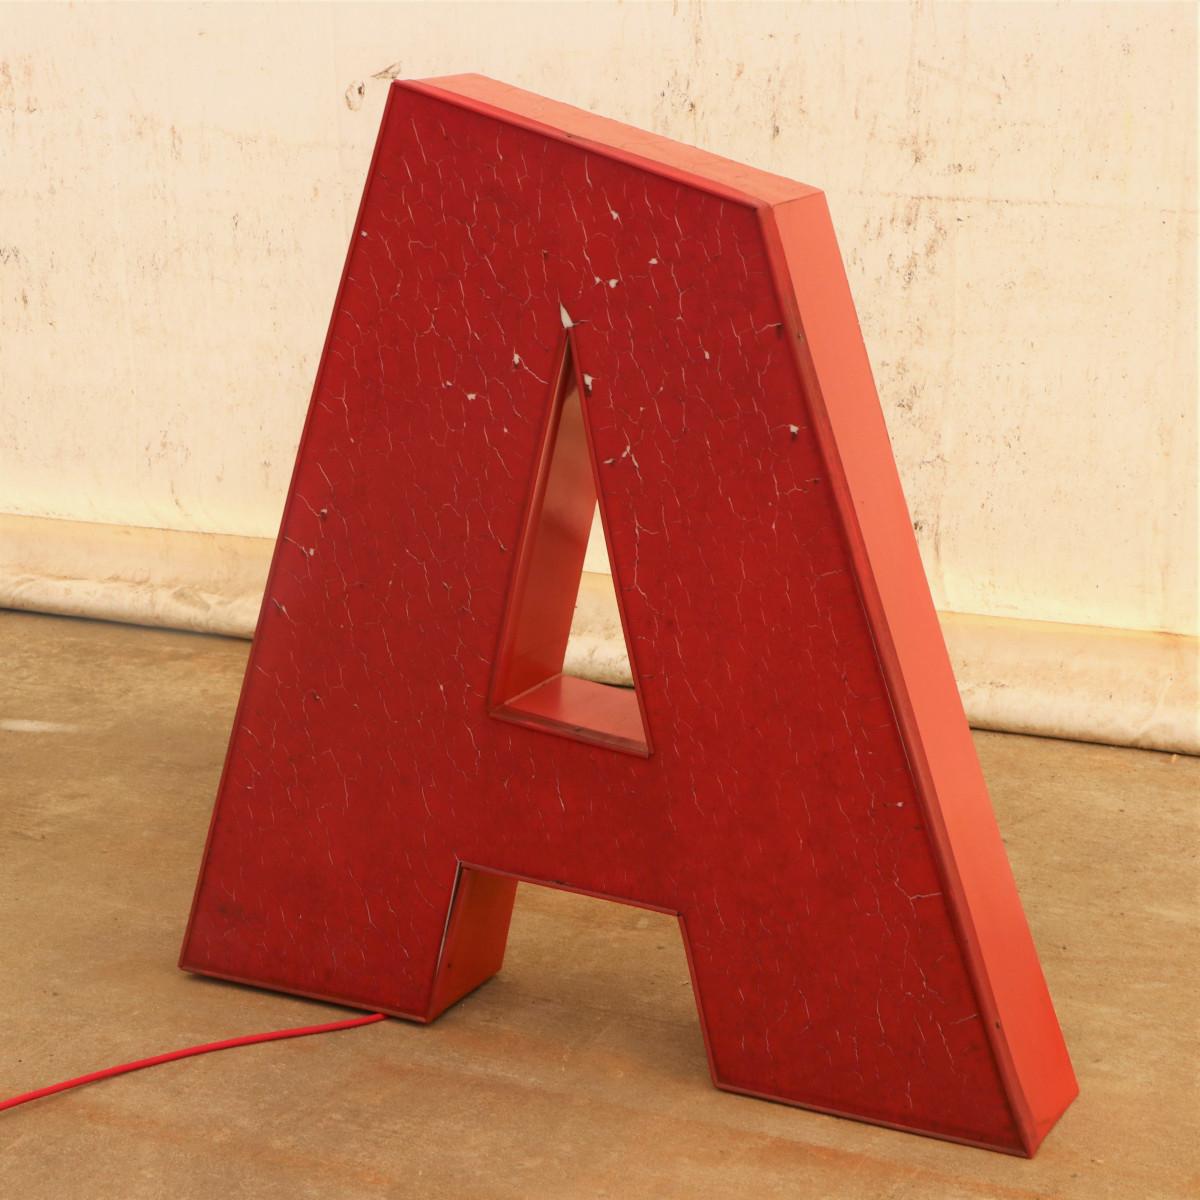 Eastern Bloc Vintage Lluminated Letter a in the Form of a Floor Night Lamp, 1970 In Fair Condition For Sale In Prague 8, CZ